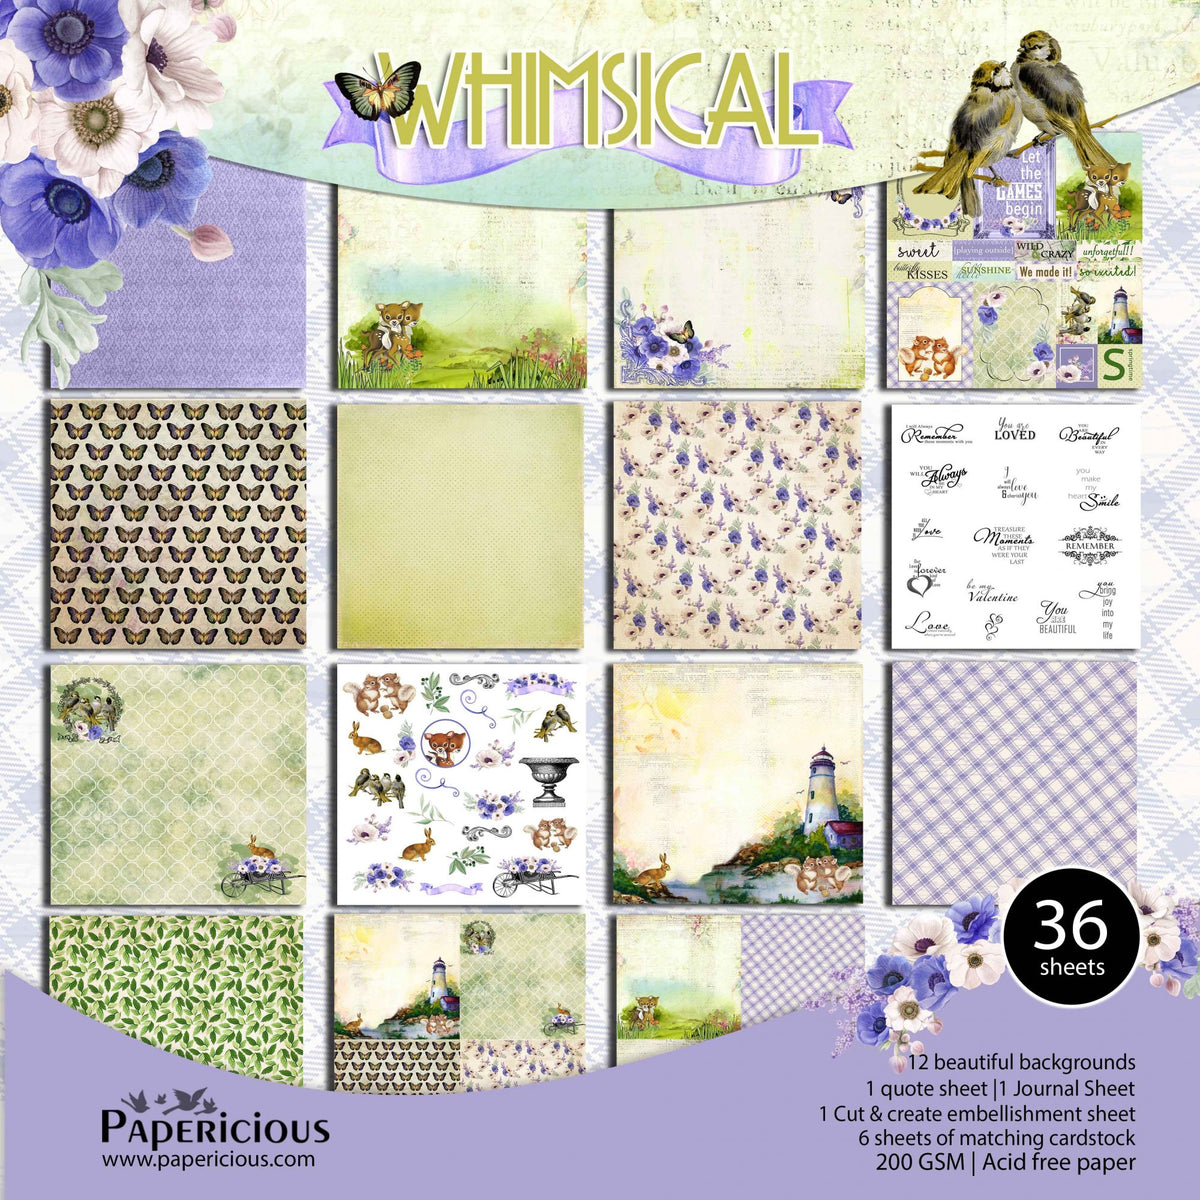 PAPERICIOUS - WHIMSICAL -  Designer Pattern Printed Scrapbook Papers 12x12 inch / 36 sheets